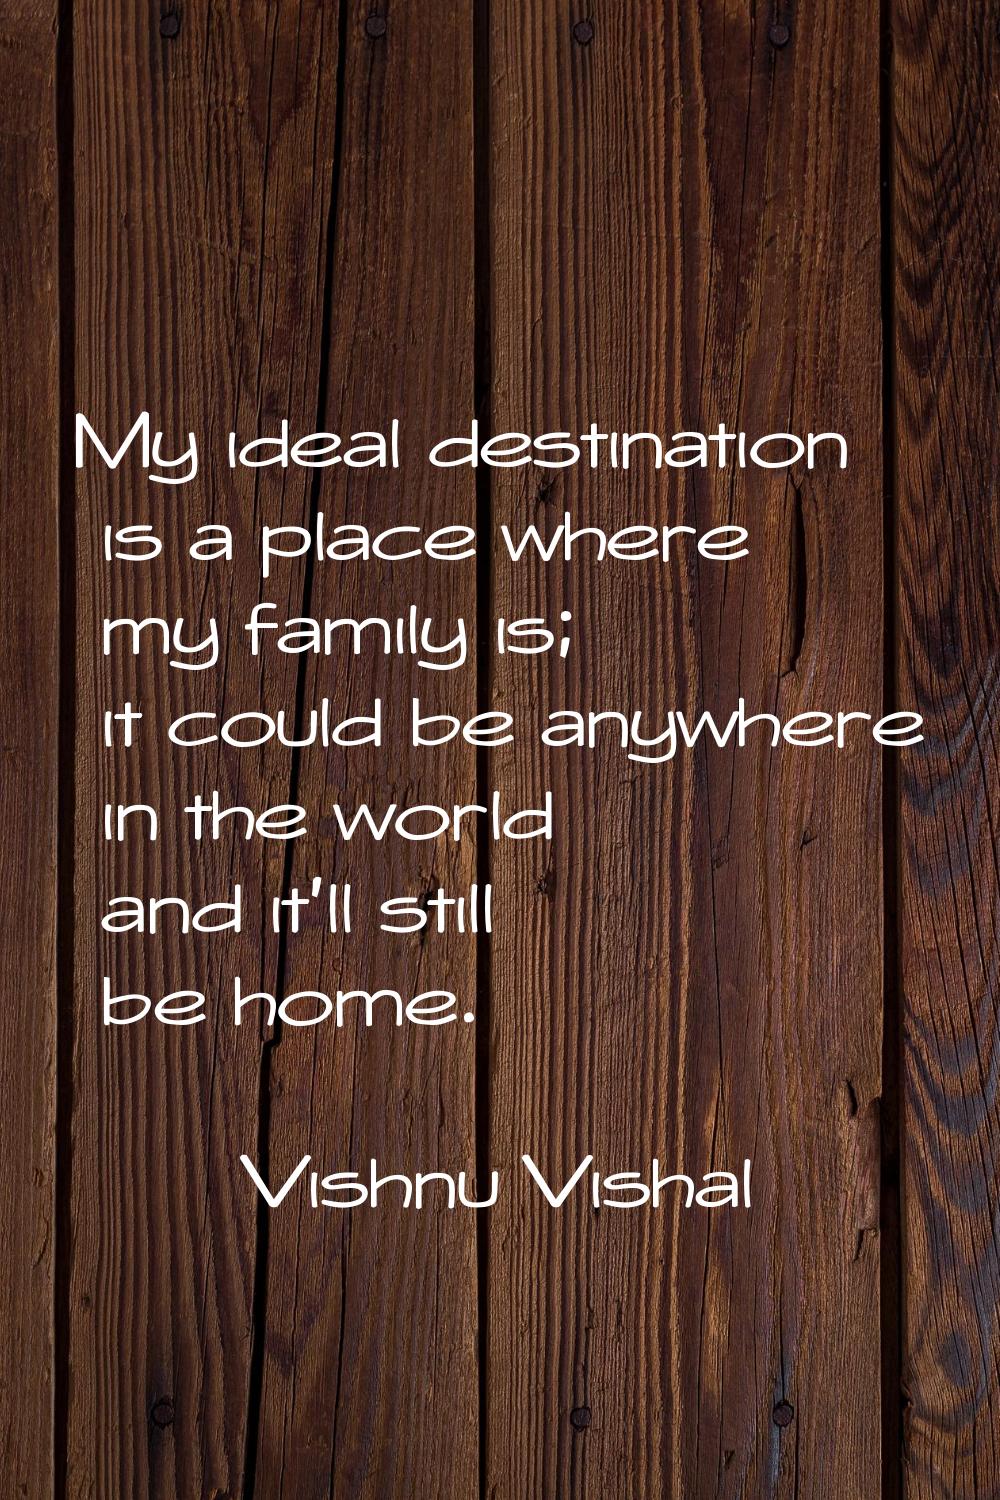 My ideal destination is a place where my family is; it could be anywhere in the world and it’ll sti